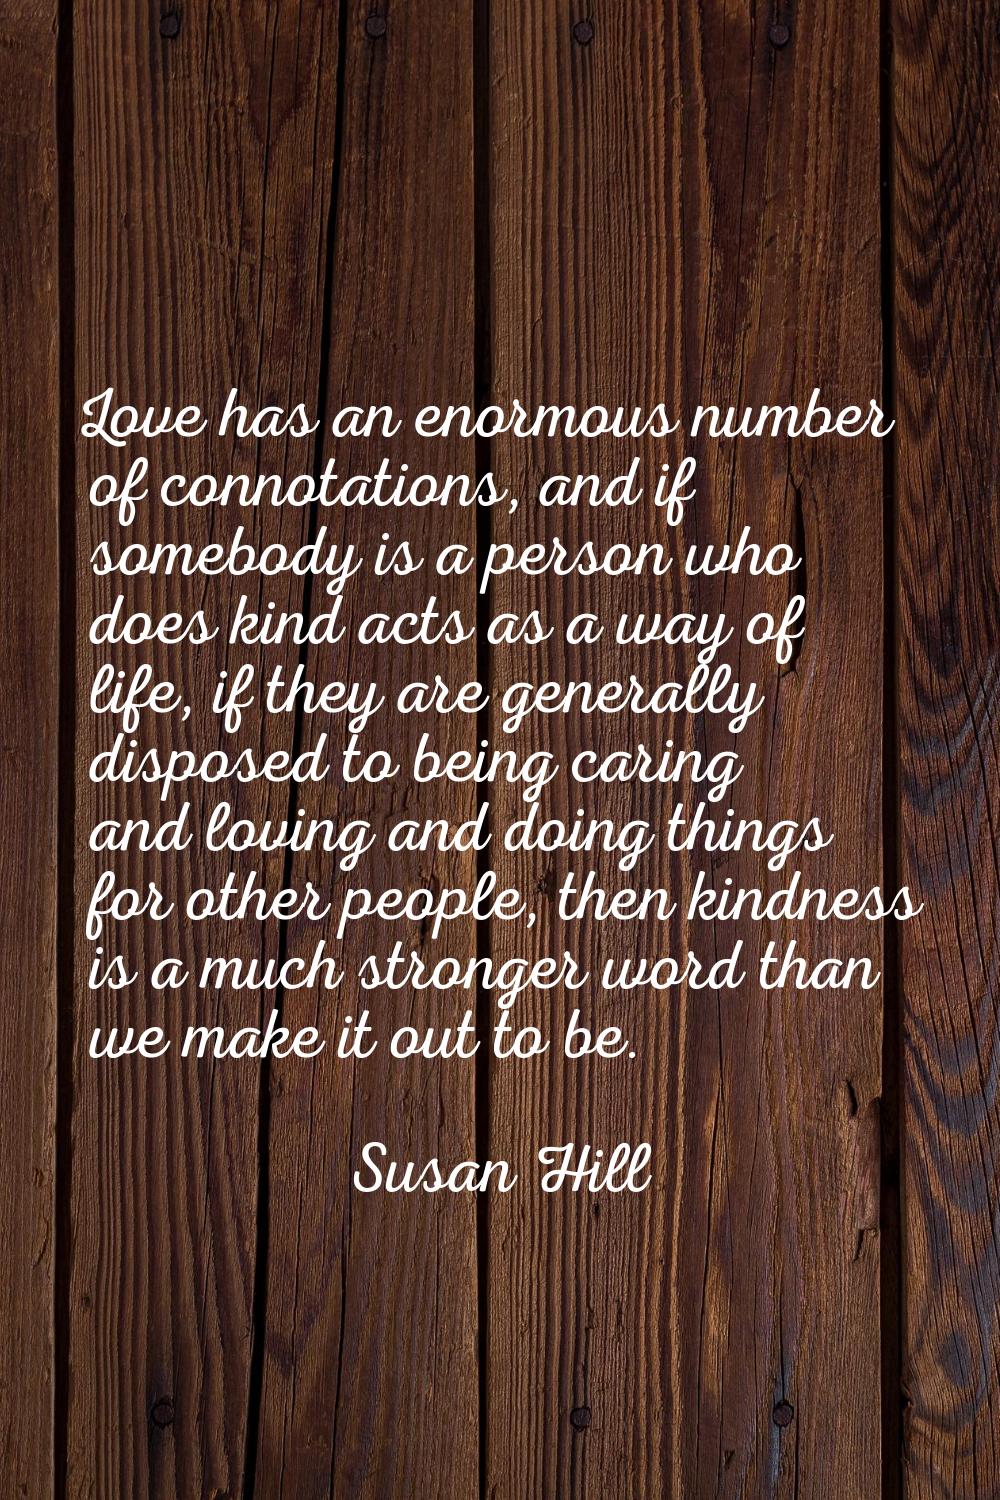 Love has an enormous number of connotations, and if somebody is a person who does kind acts as a wa